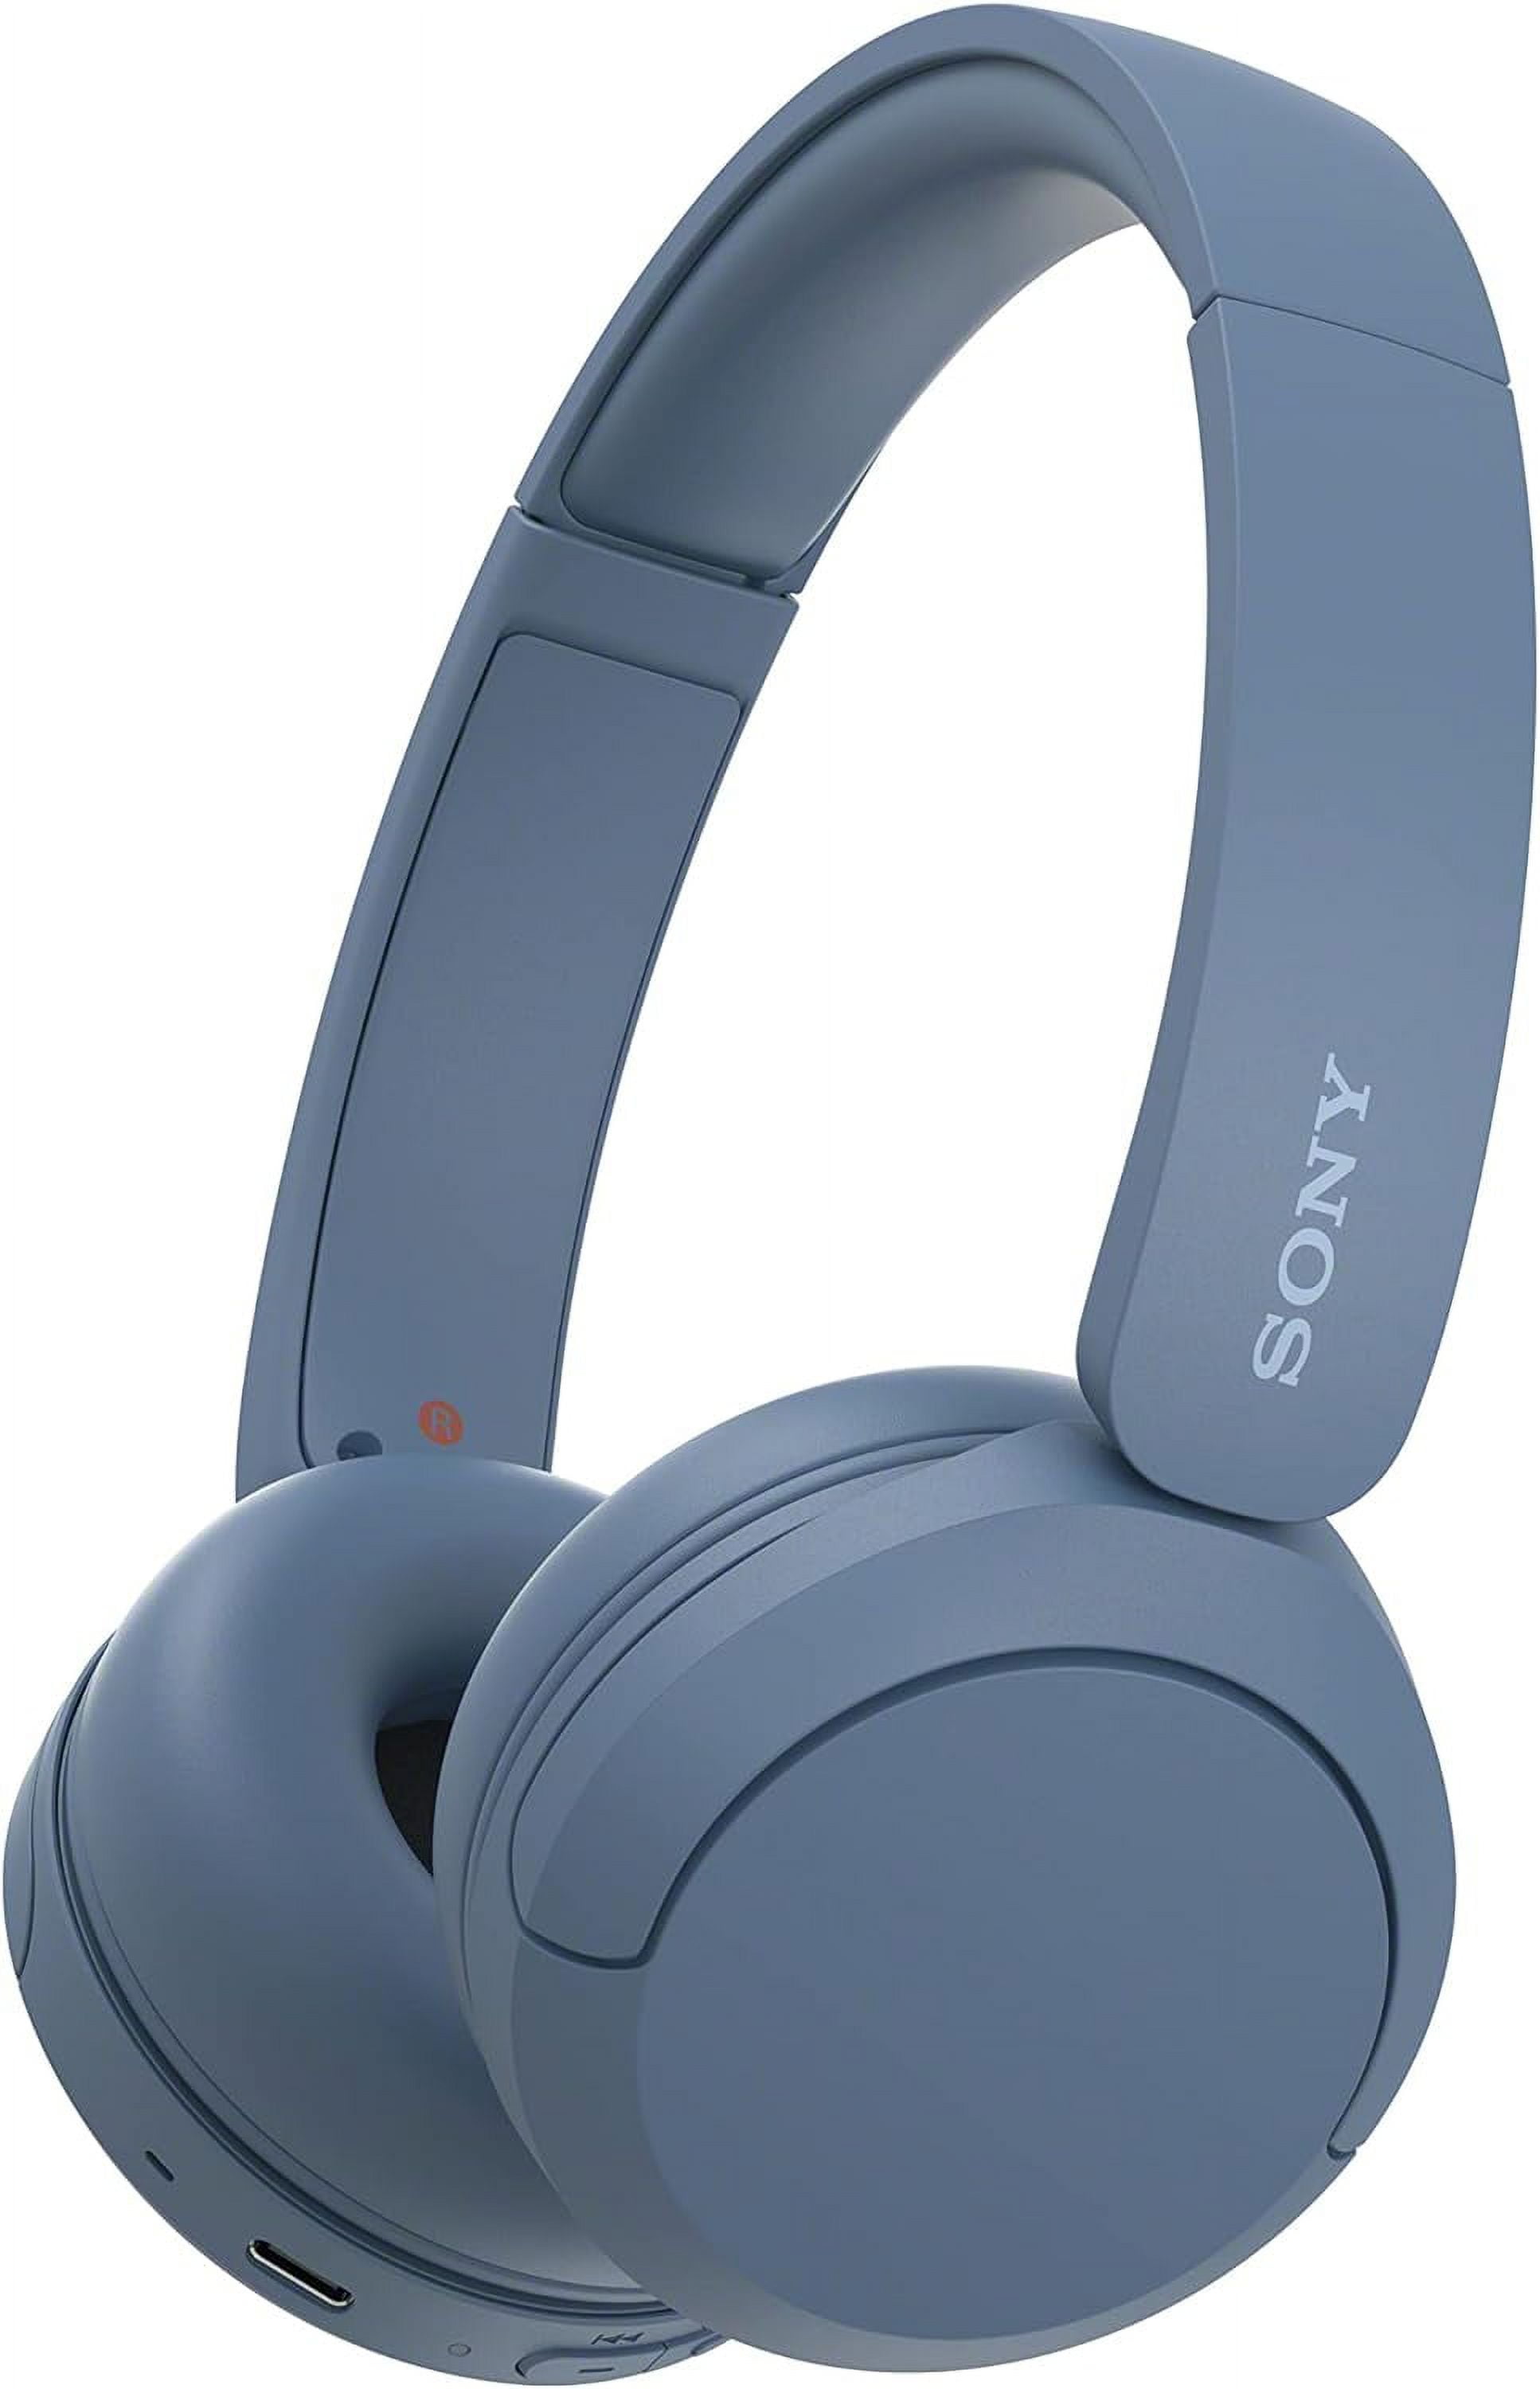 Sony WH-CH520 Wireless Headphones Bluetooth On-Ear Headset with Microphone,  Black New